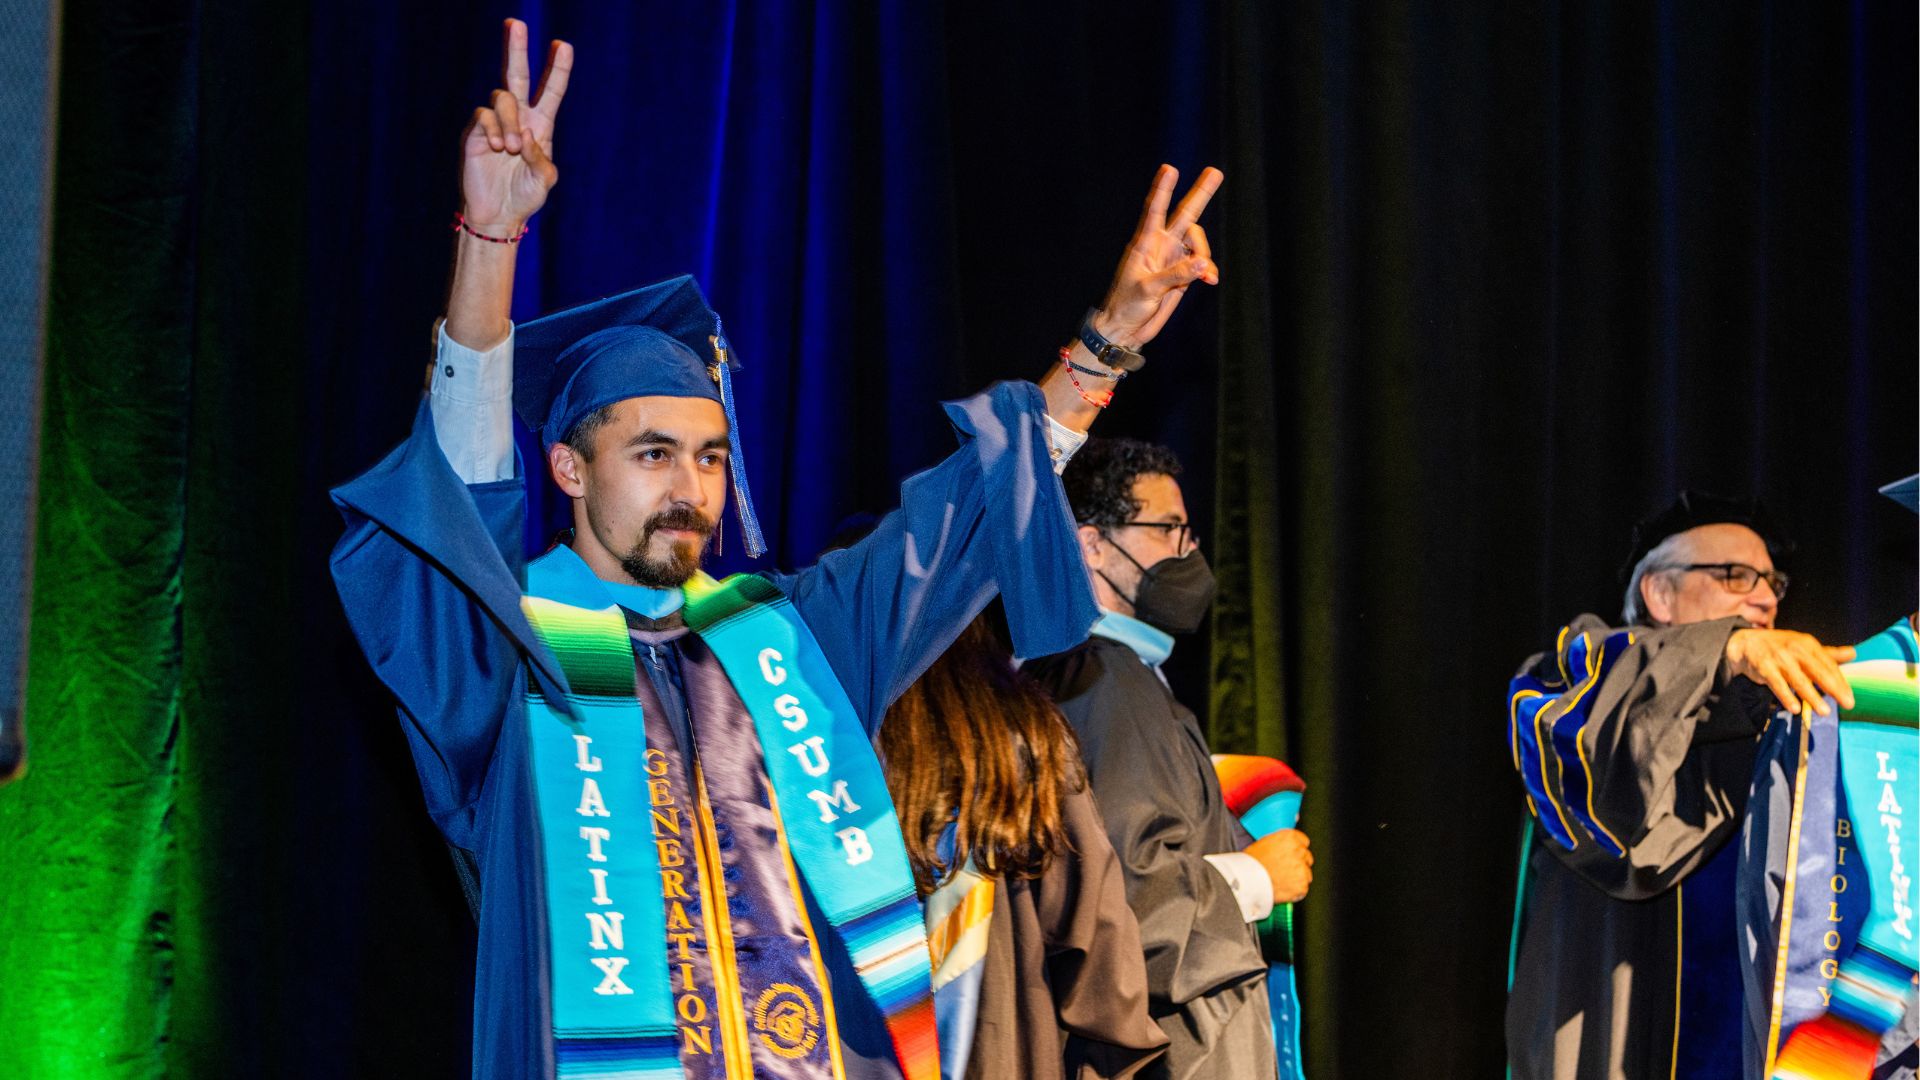 A Latinx student crosses the state at the stole ceremony